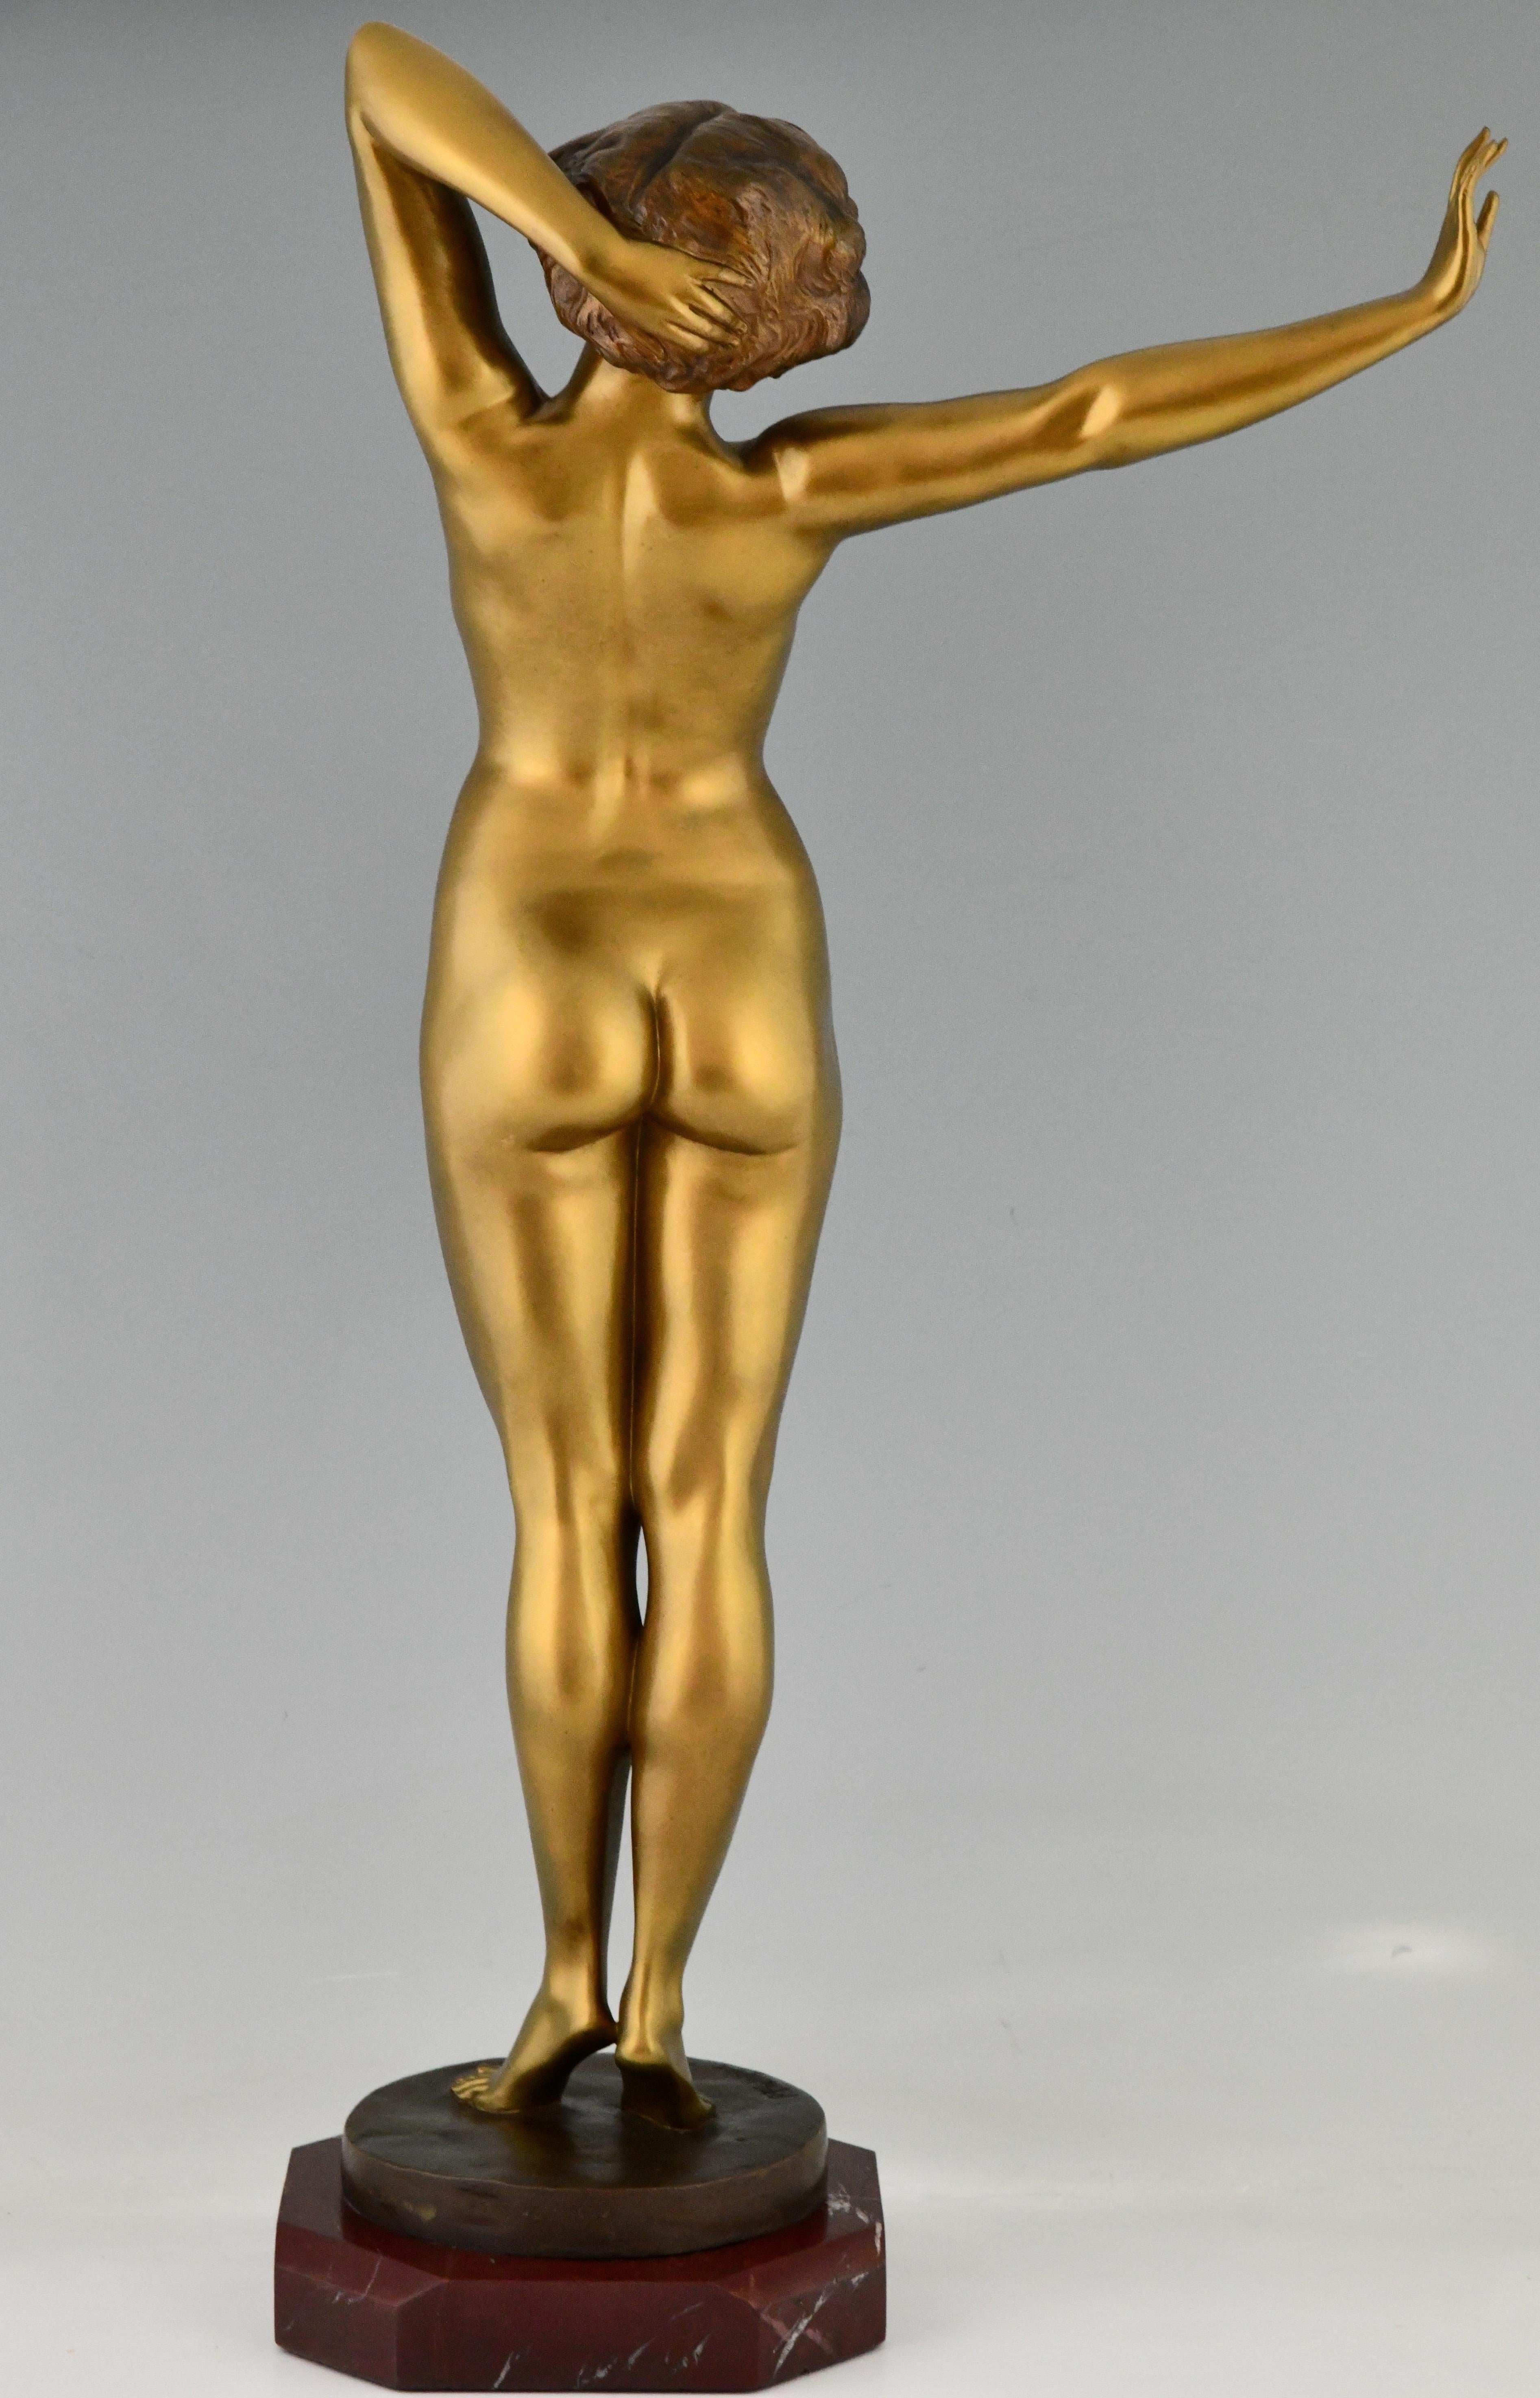 Early 20th Century Awakening Art Deco Bronze Sculpture Nude by Paul Philippe, France, 1920